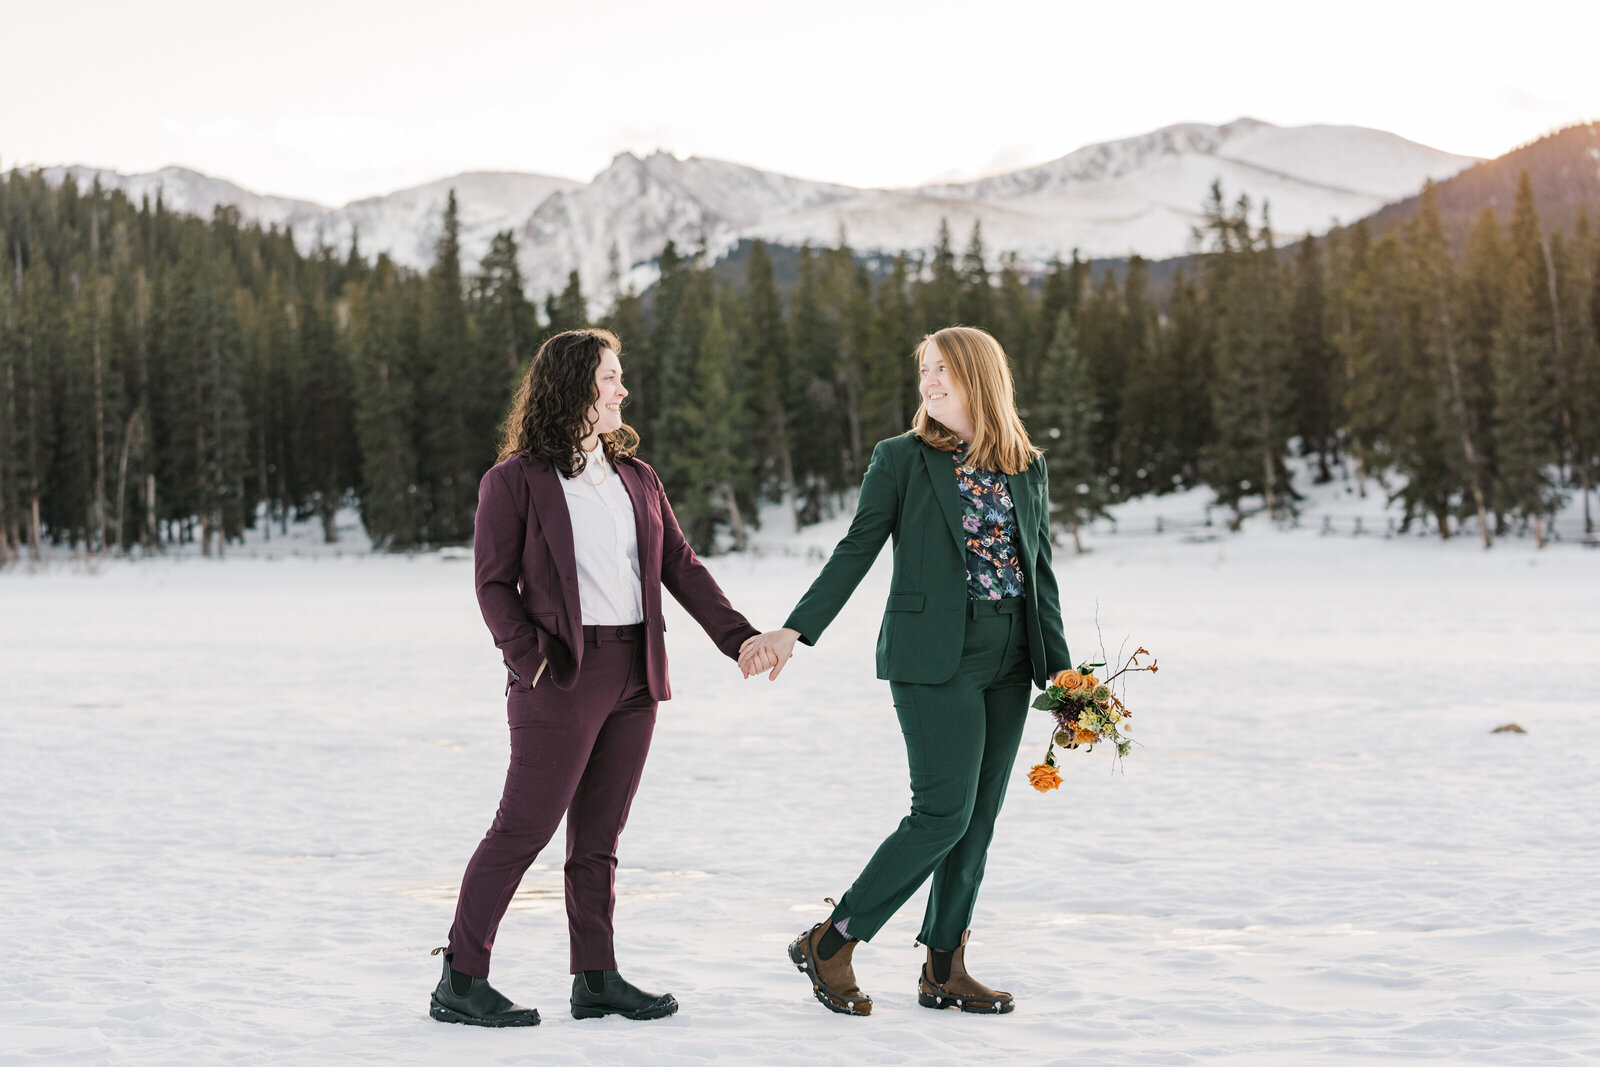 Intimate Vows in the Mountains" - A romantic and personal elopement ceremony in the heart of the Rocky Mountains.